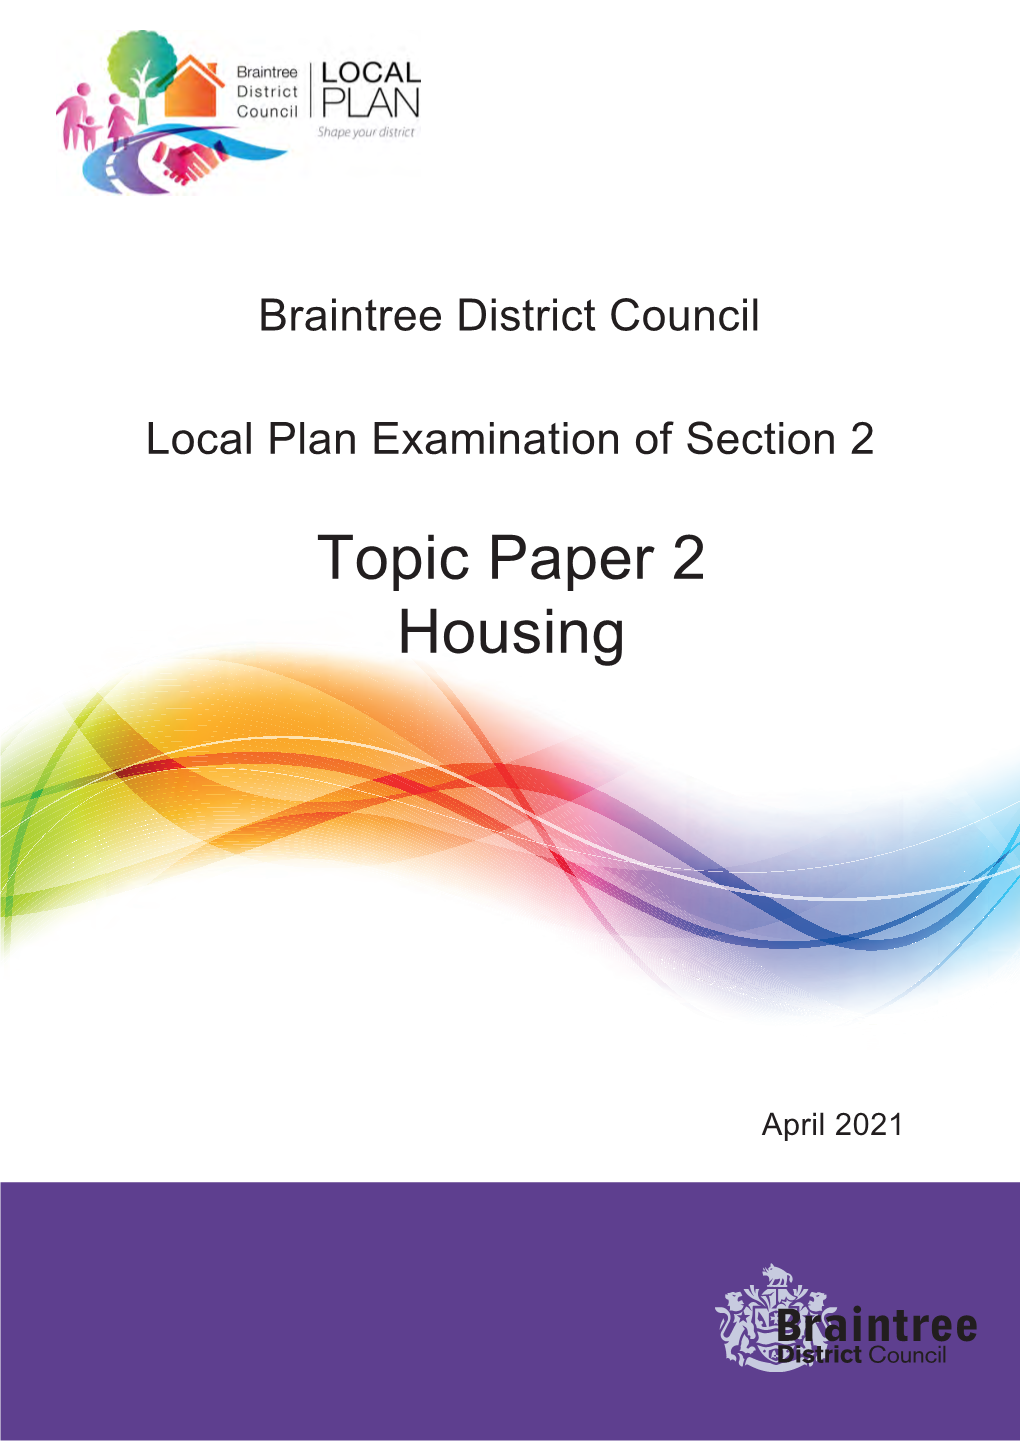 Topic Paper 2 Housing